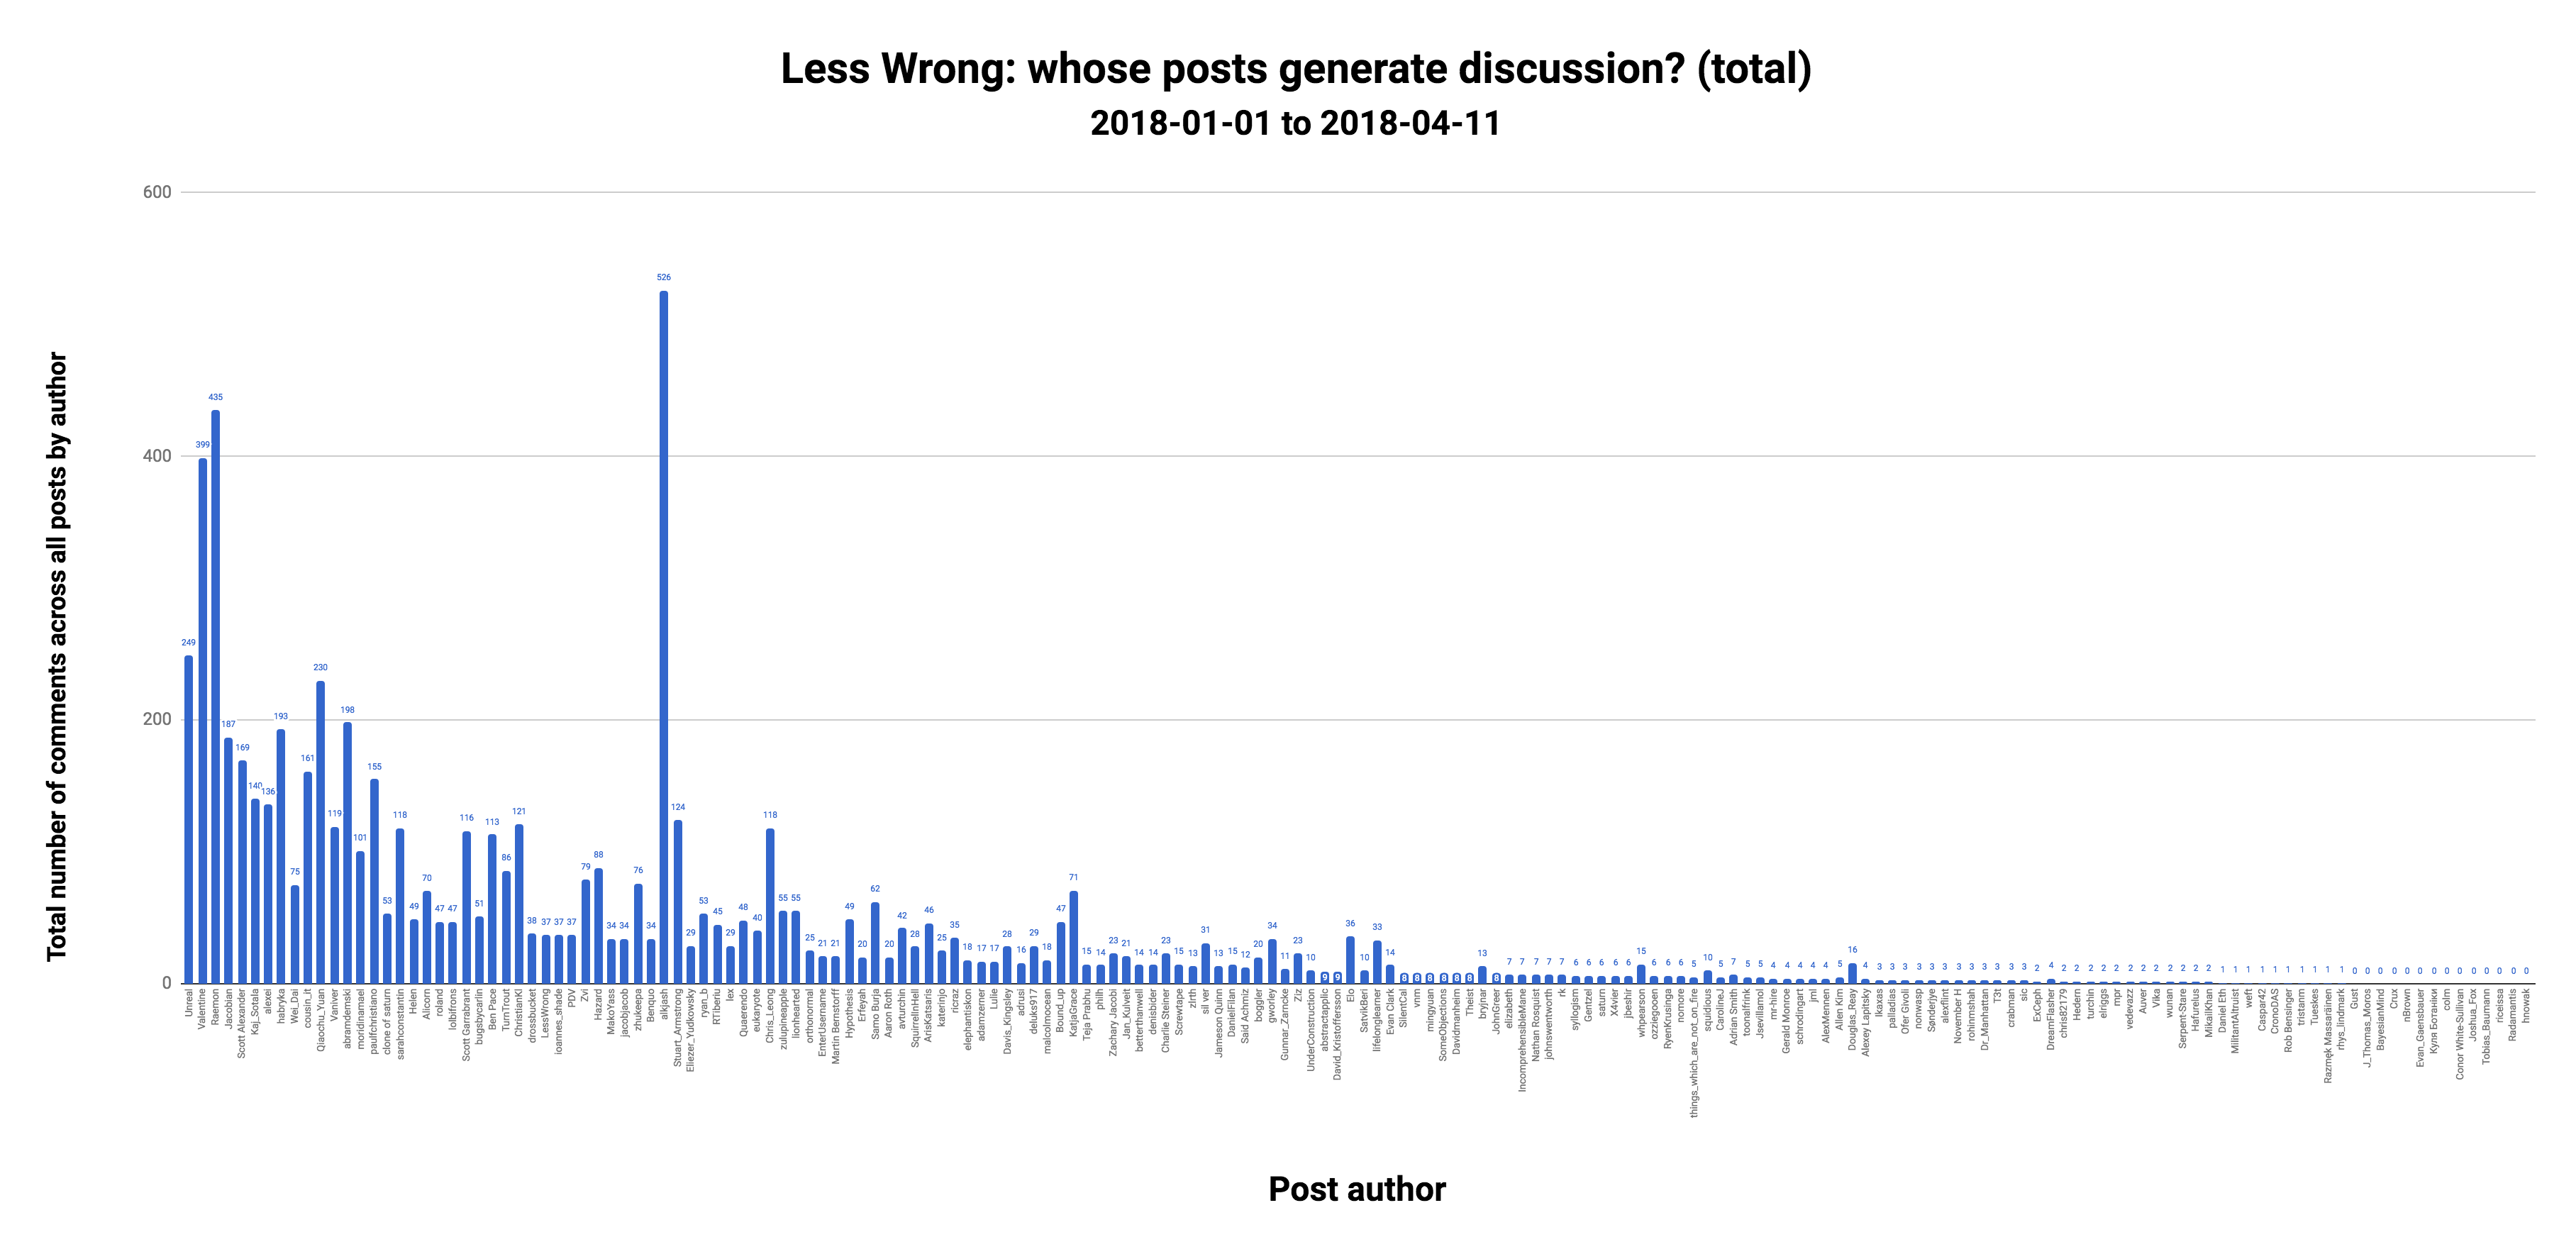 Less Wrong: whose posts generate discussion? (total)